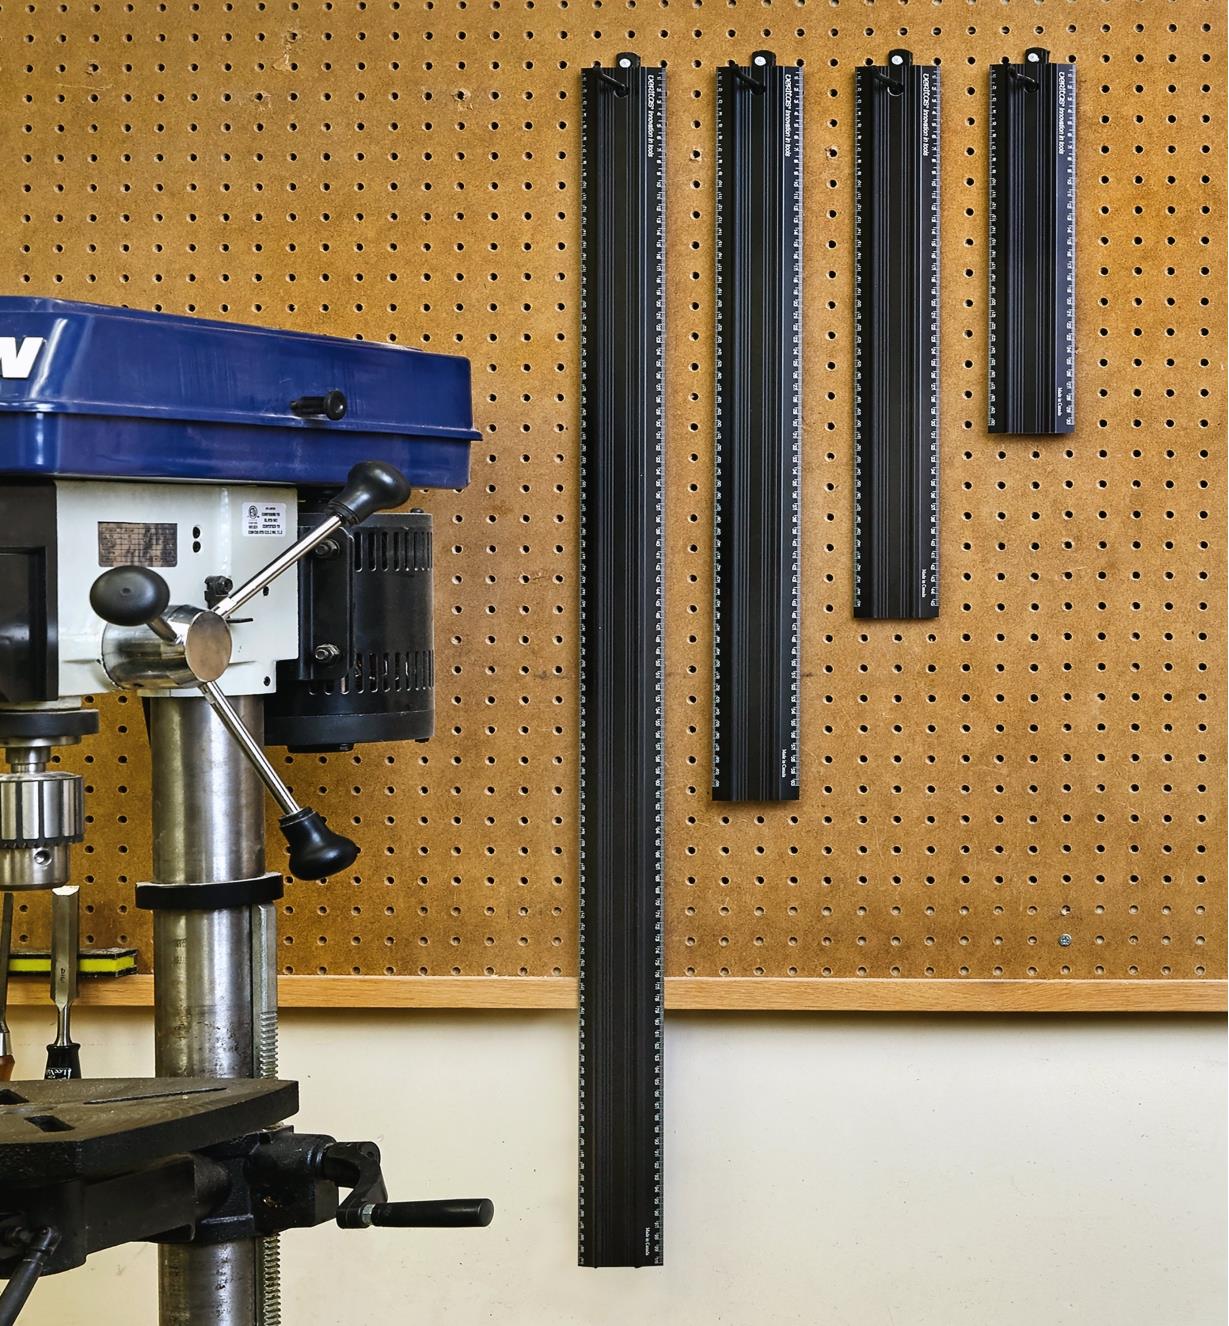 Four sizes of Veritas metric shop rules hung on a pegboard near a drill press